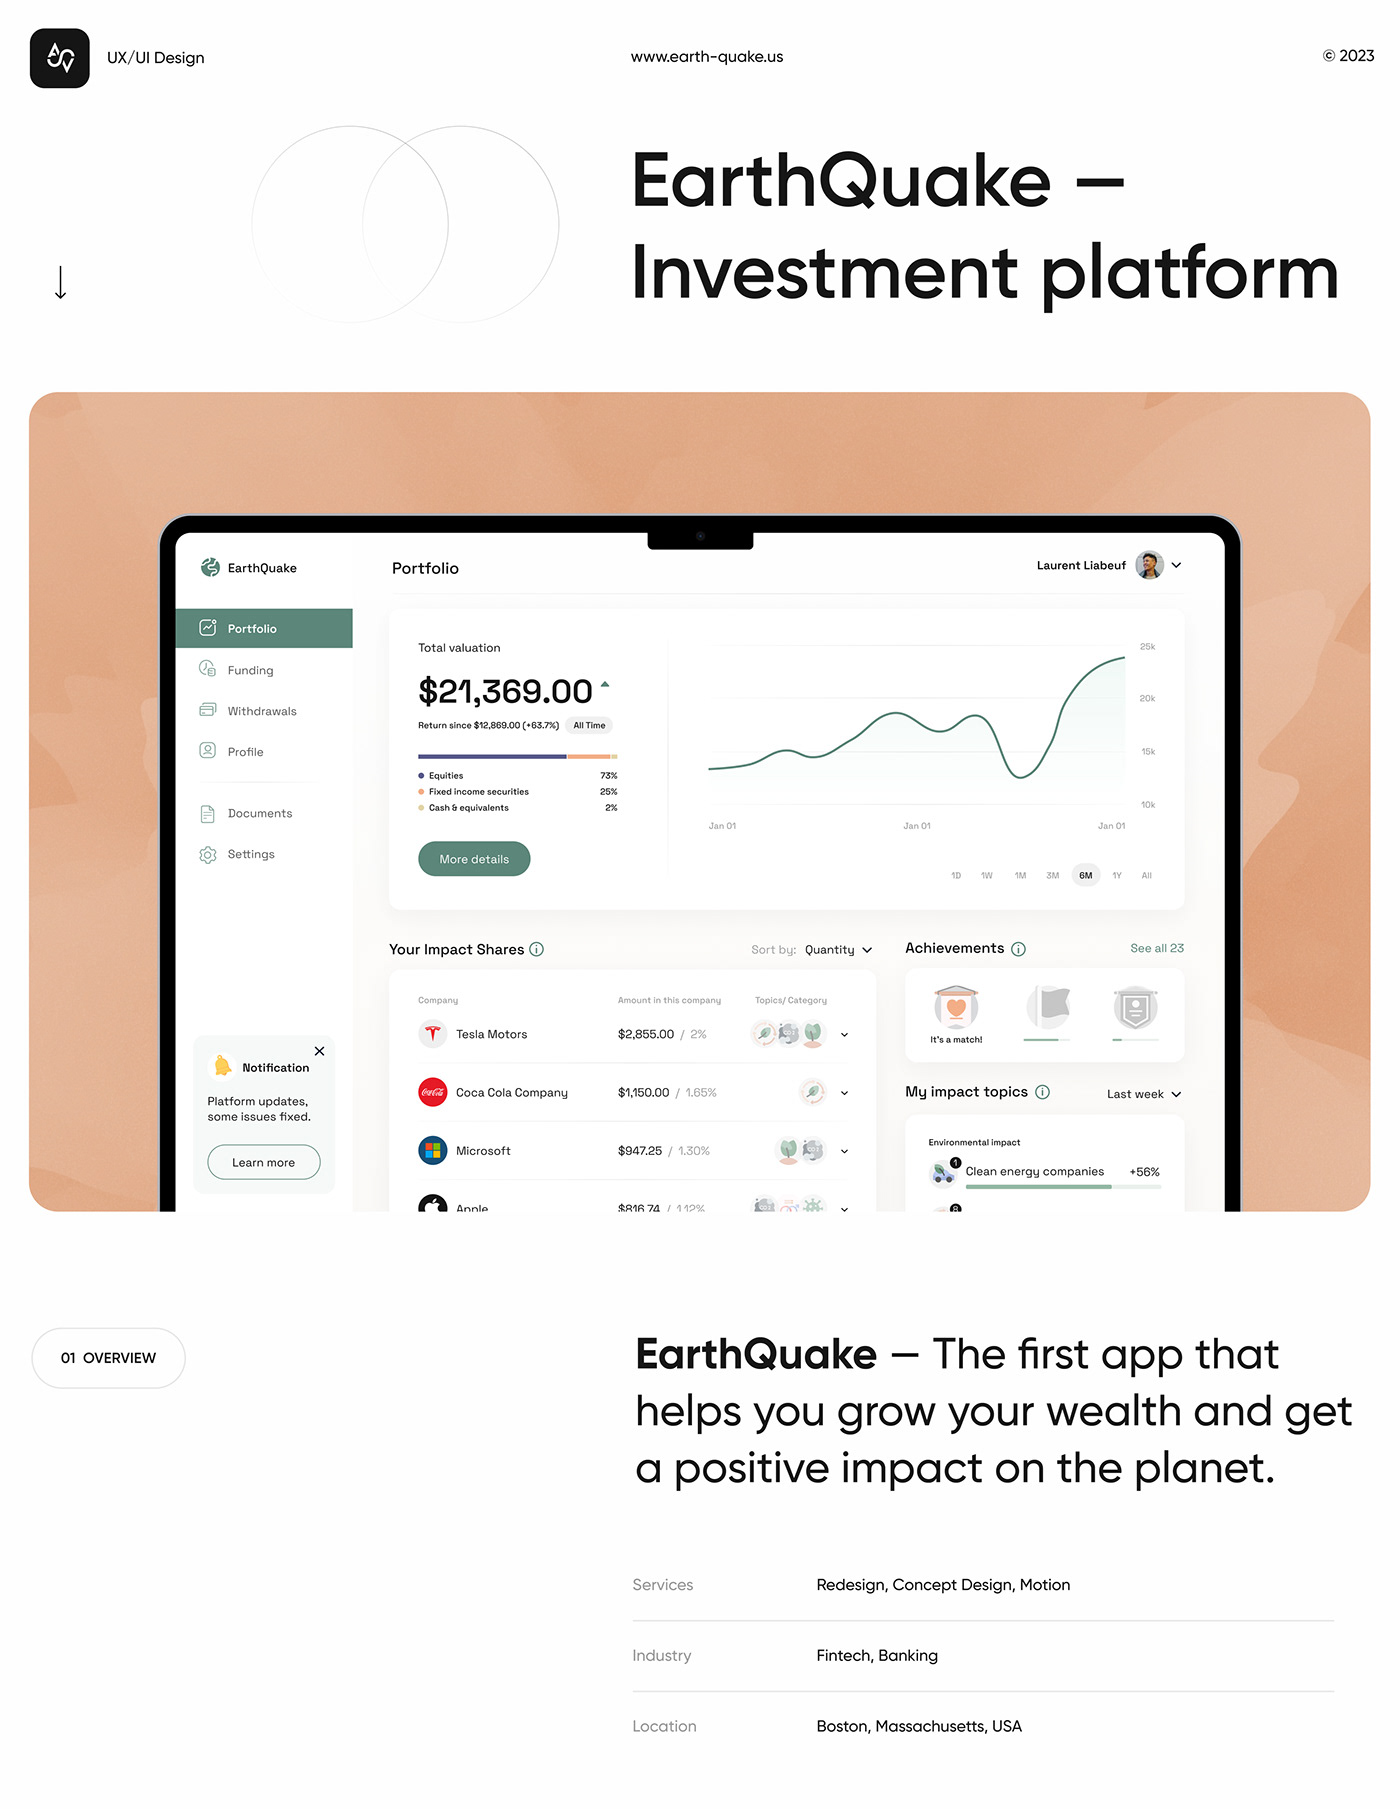 The first app that help you grow your wealth and get a positive impact on the planet.